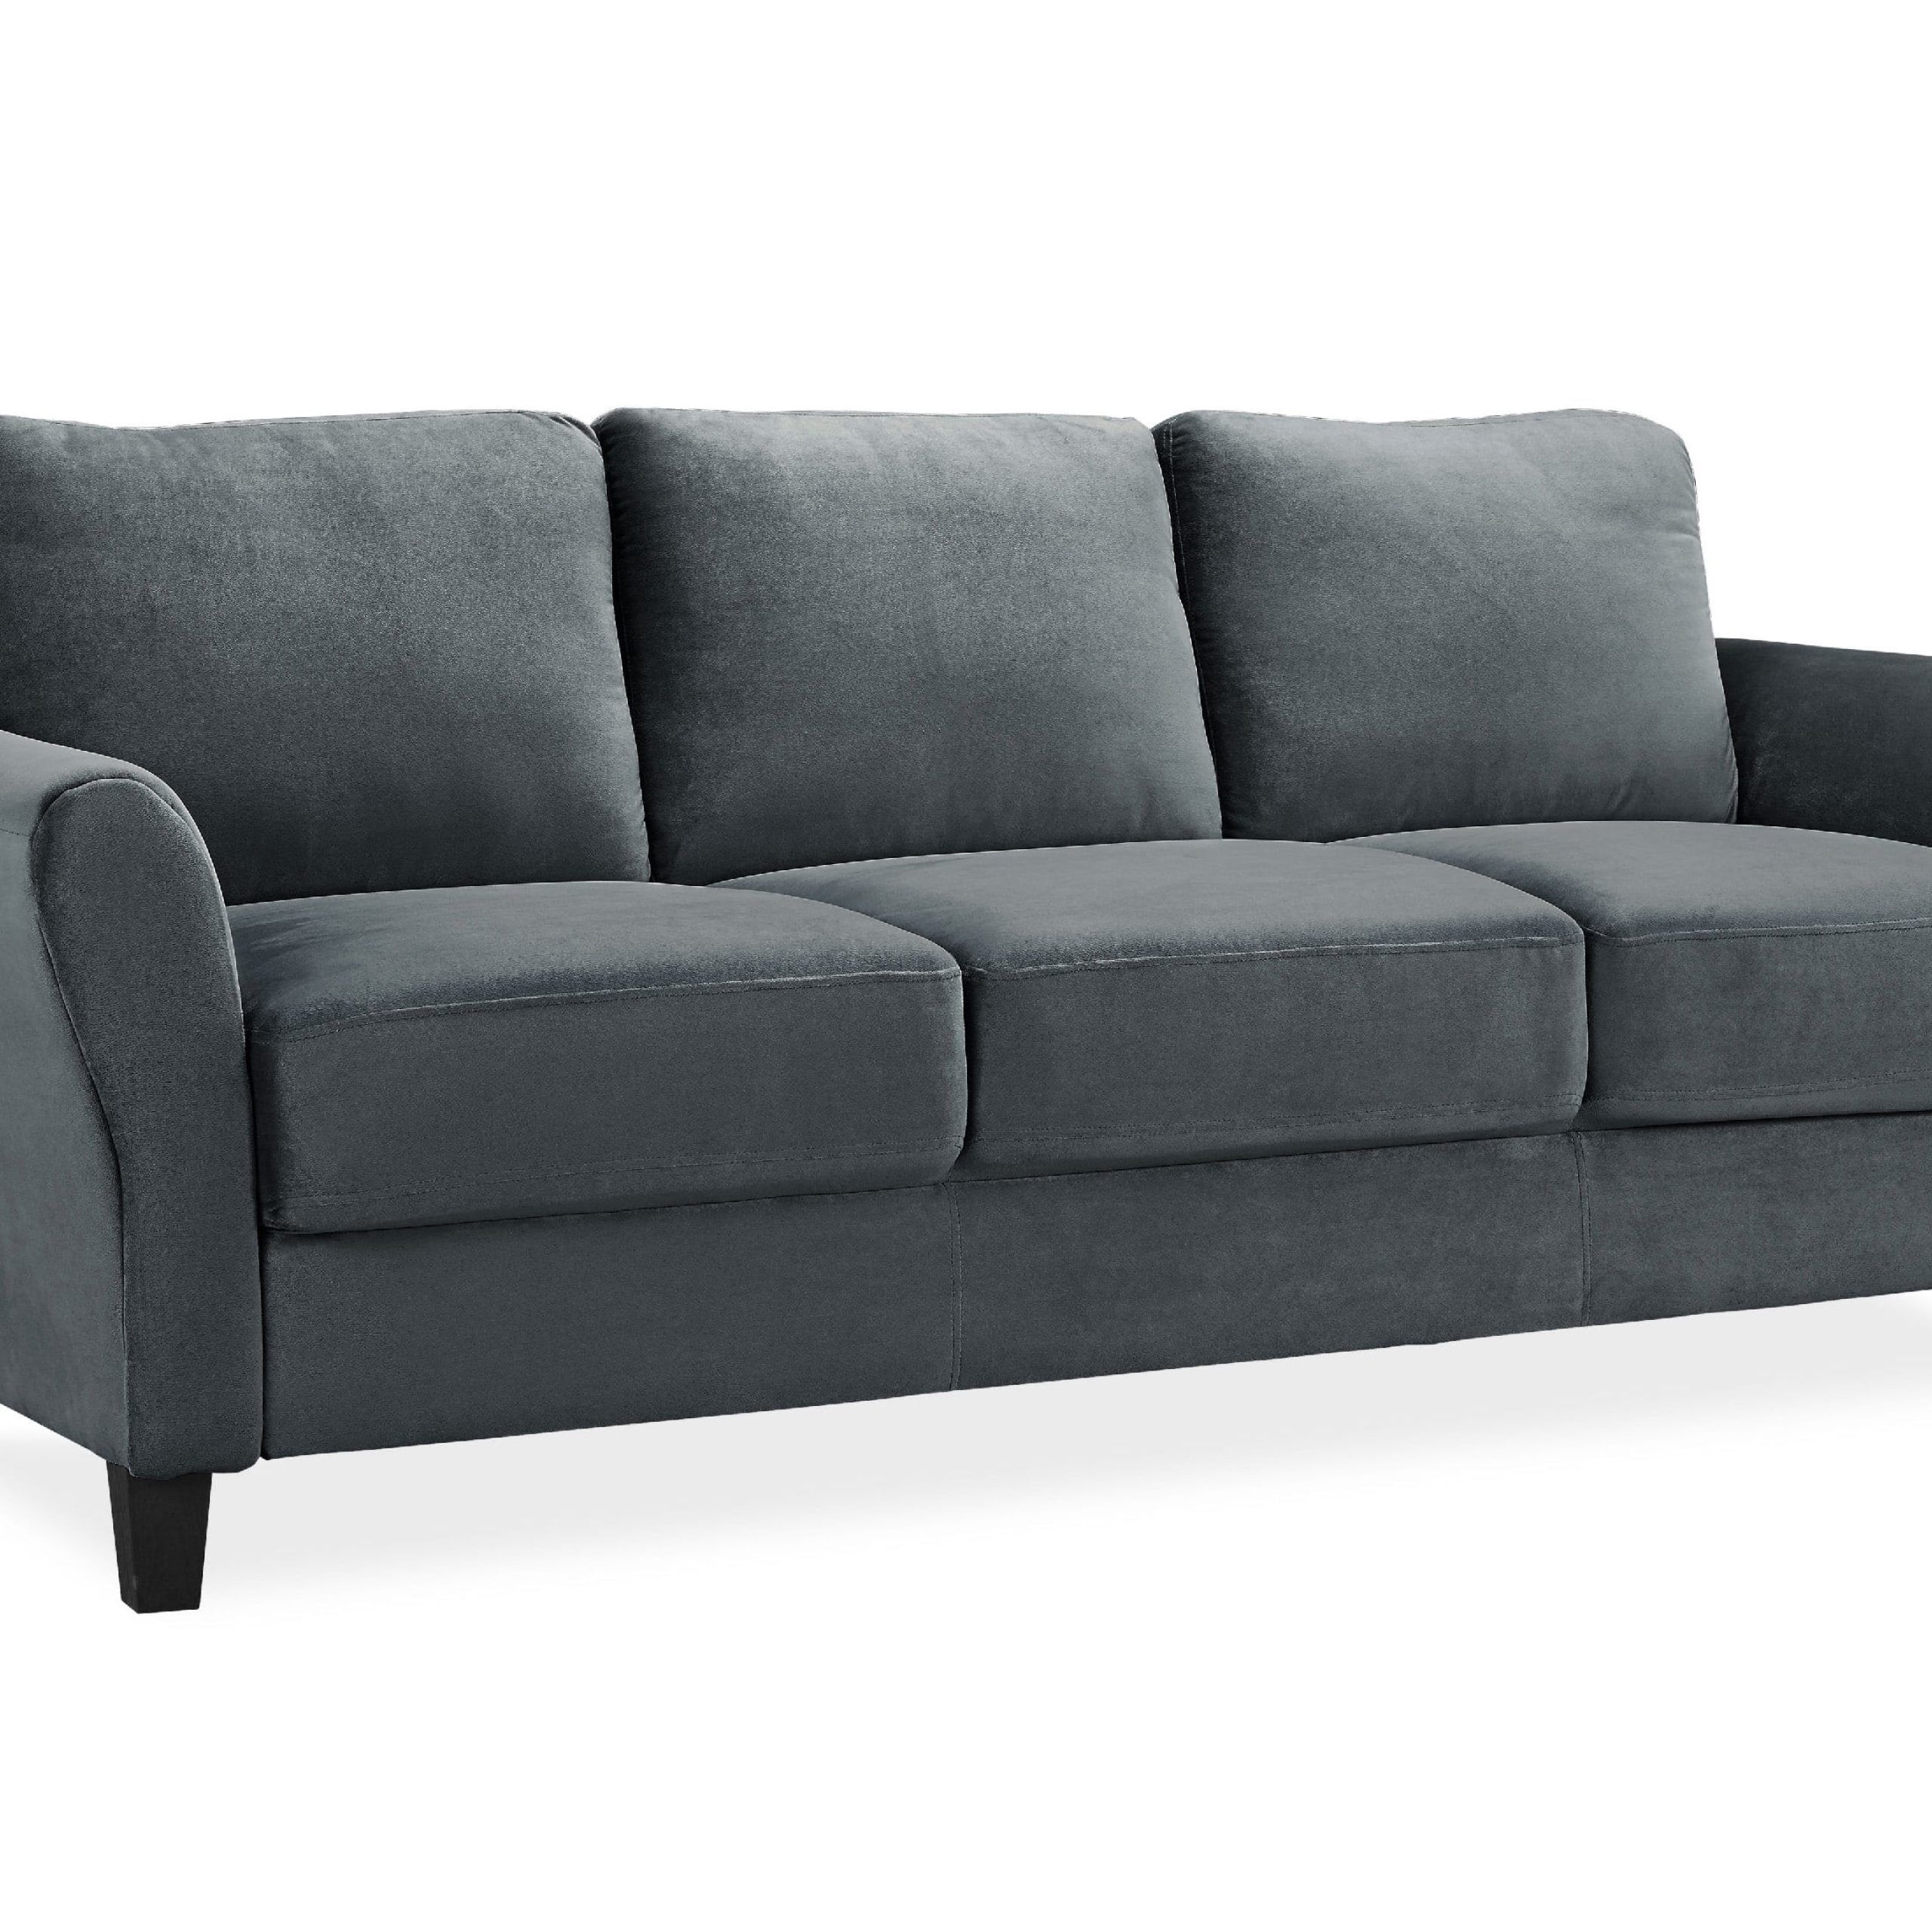 Lifestyle Solutions Alexa Sofa With Curved Arms, Gray Fabric – Walmart Intended For Sofas With Curved Arms (View 7 of 15)